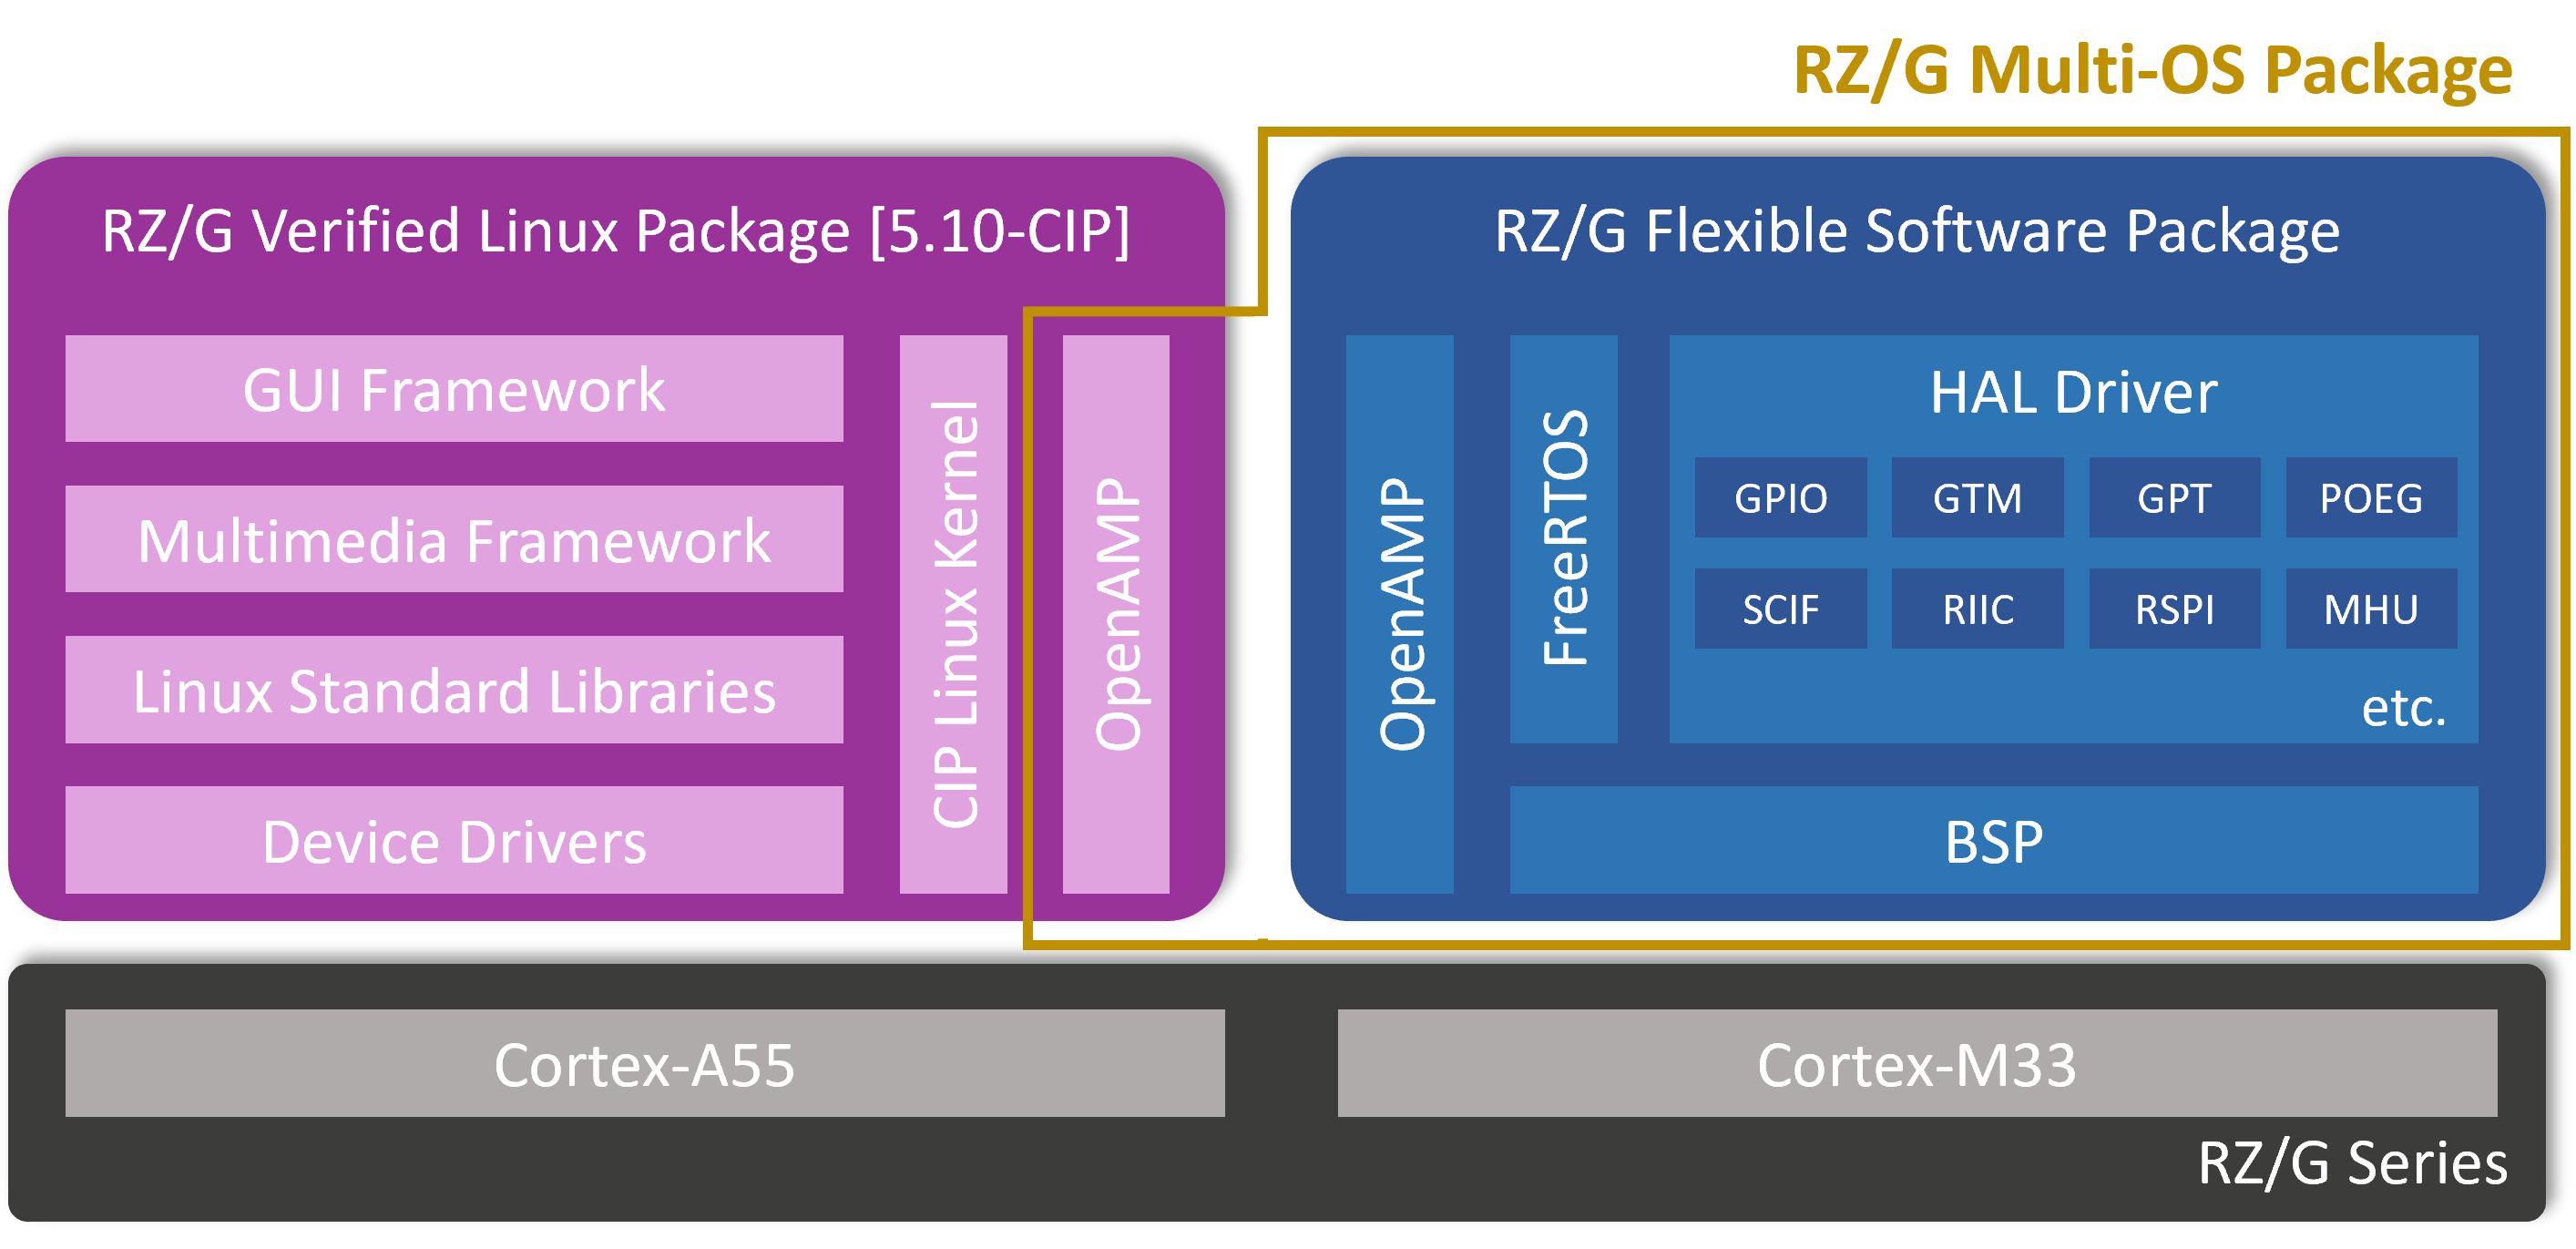 RZG multi-os package system architecture